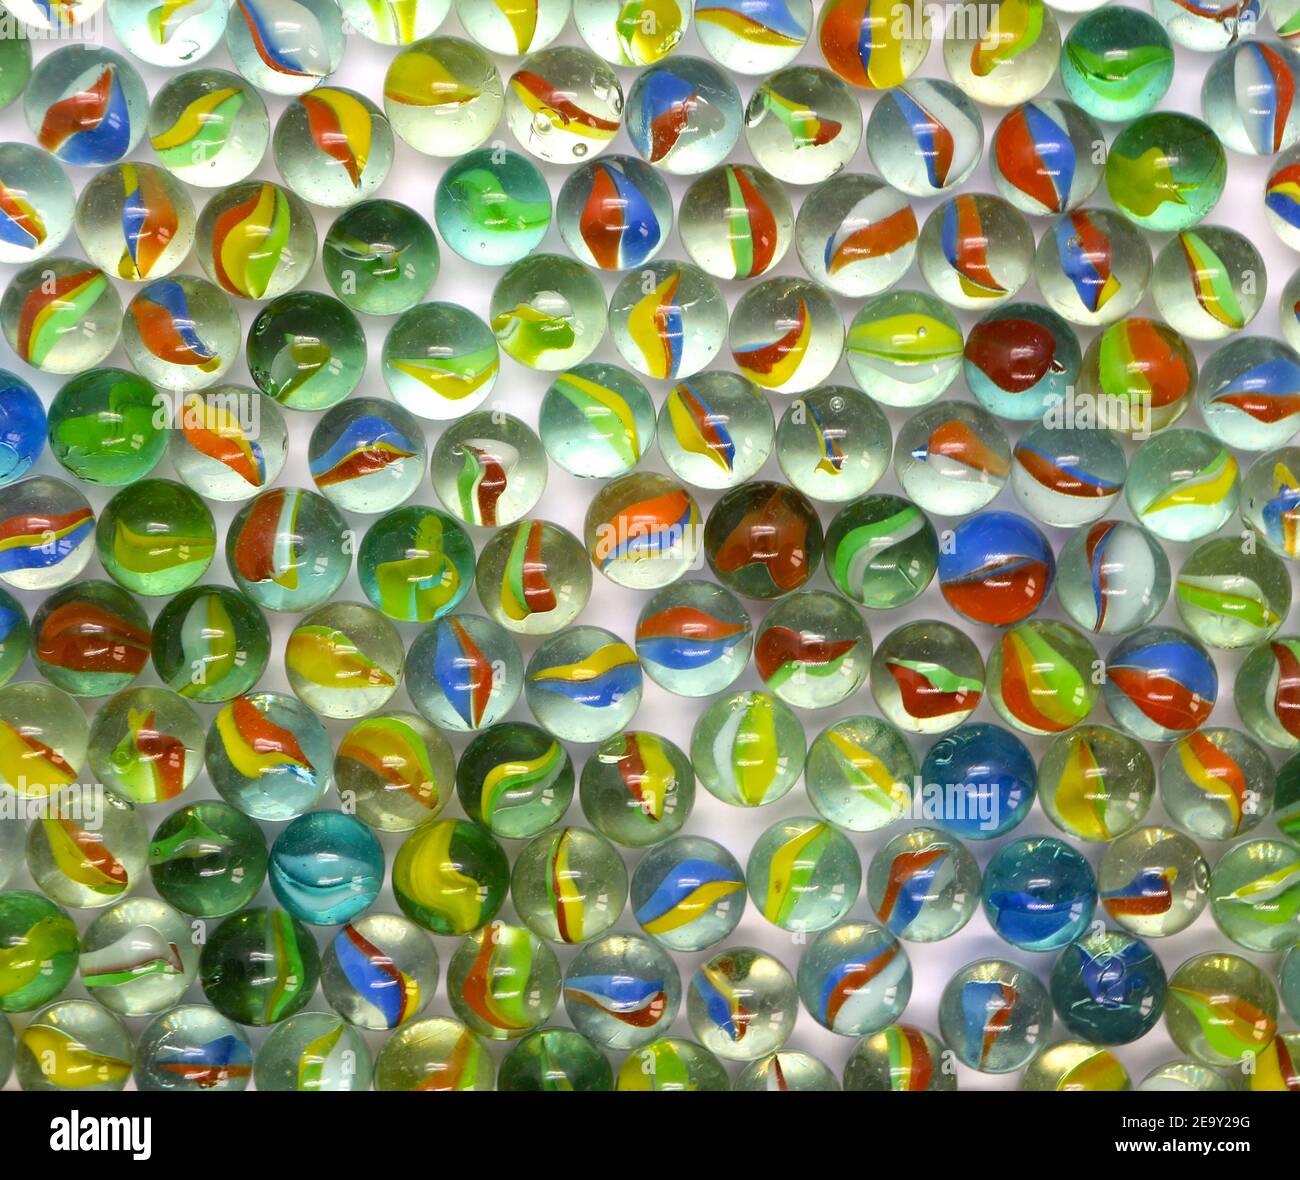 Photo of Dozens of colourful glass marbles from above Stock Photo